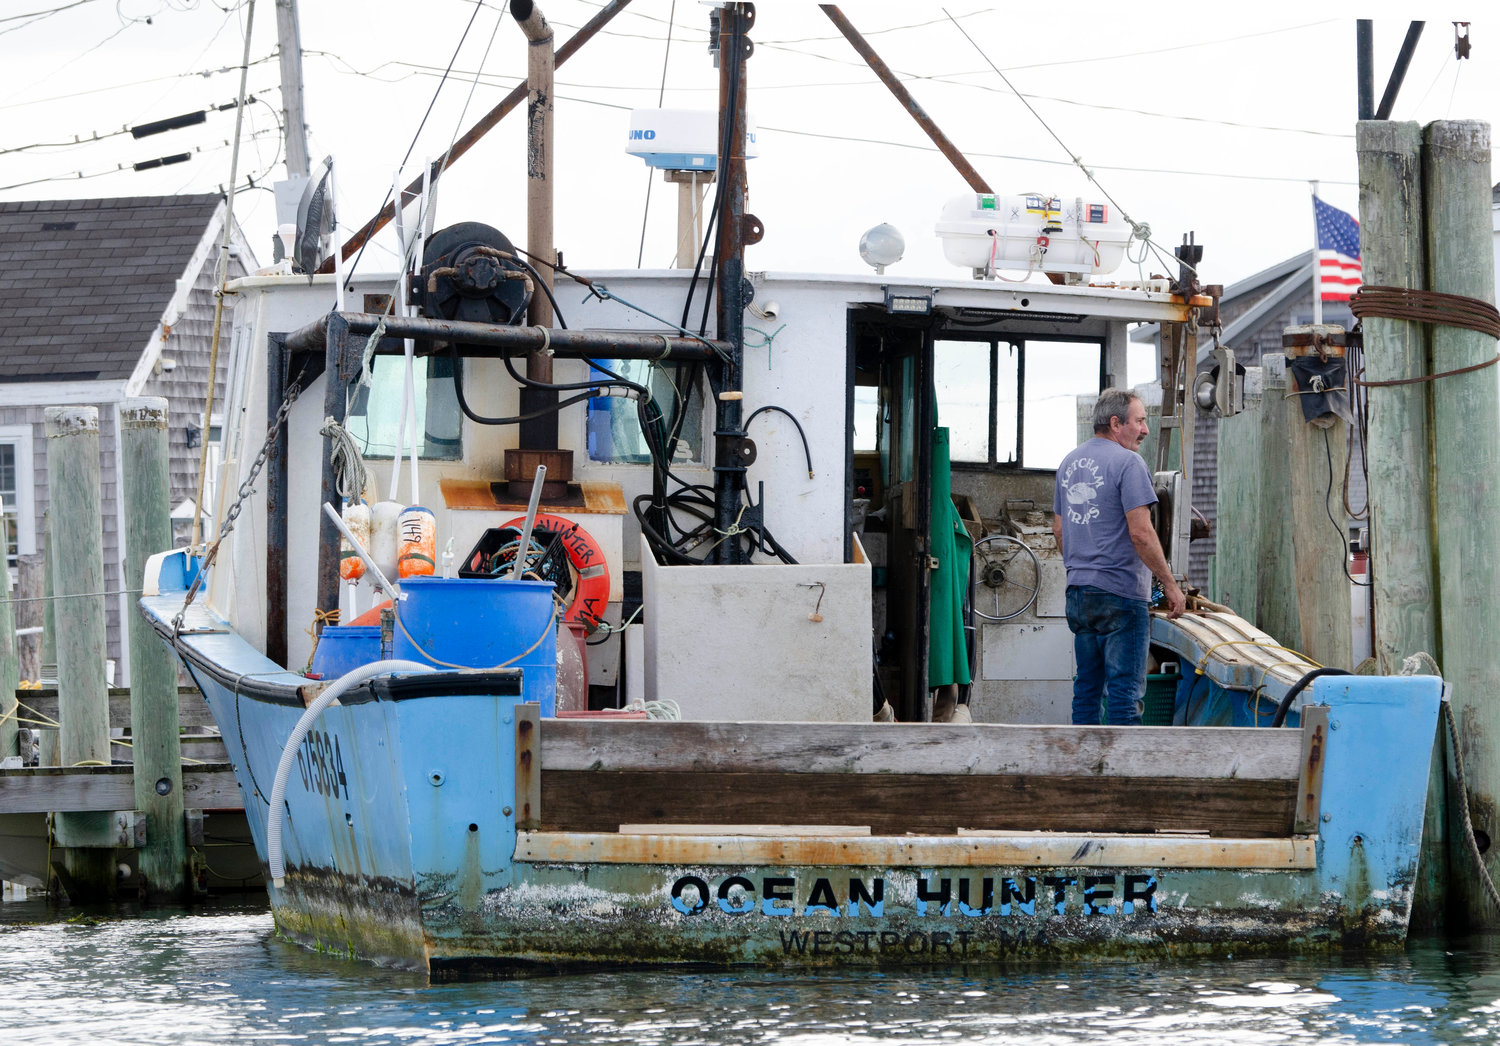 With more than 1,000 linear feet of commercial vessels fishing out of the town dock, the channel's shoaling problem is causing economic hardship, fishermen say.